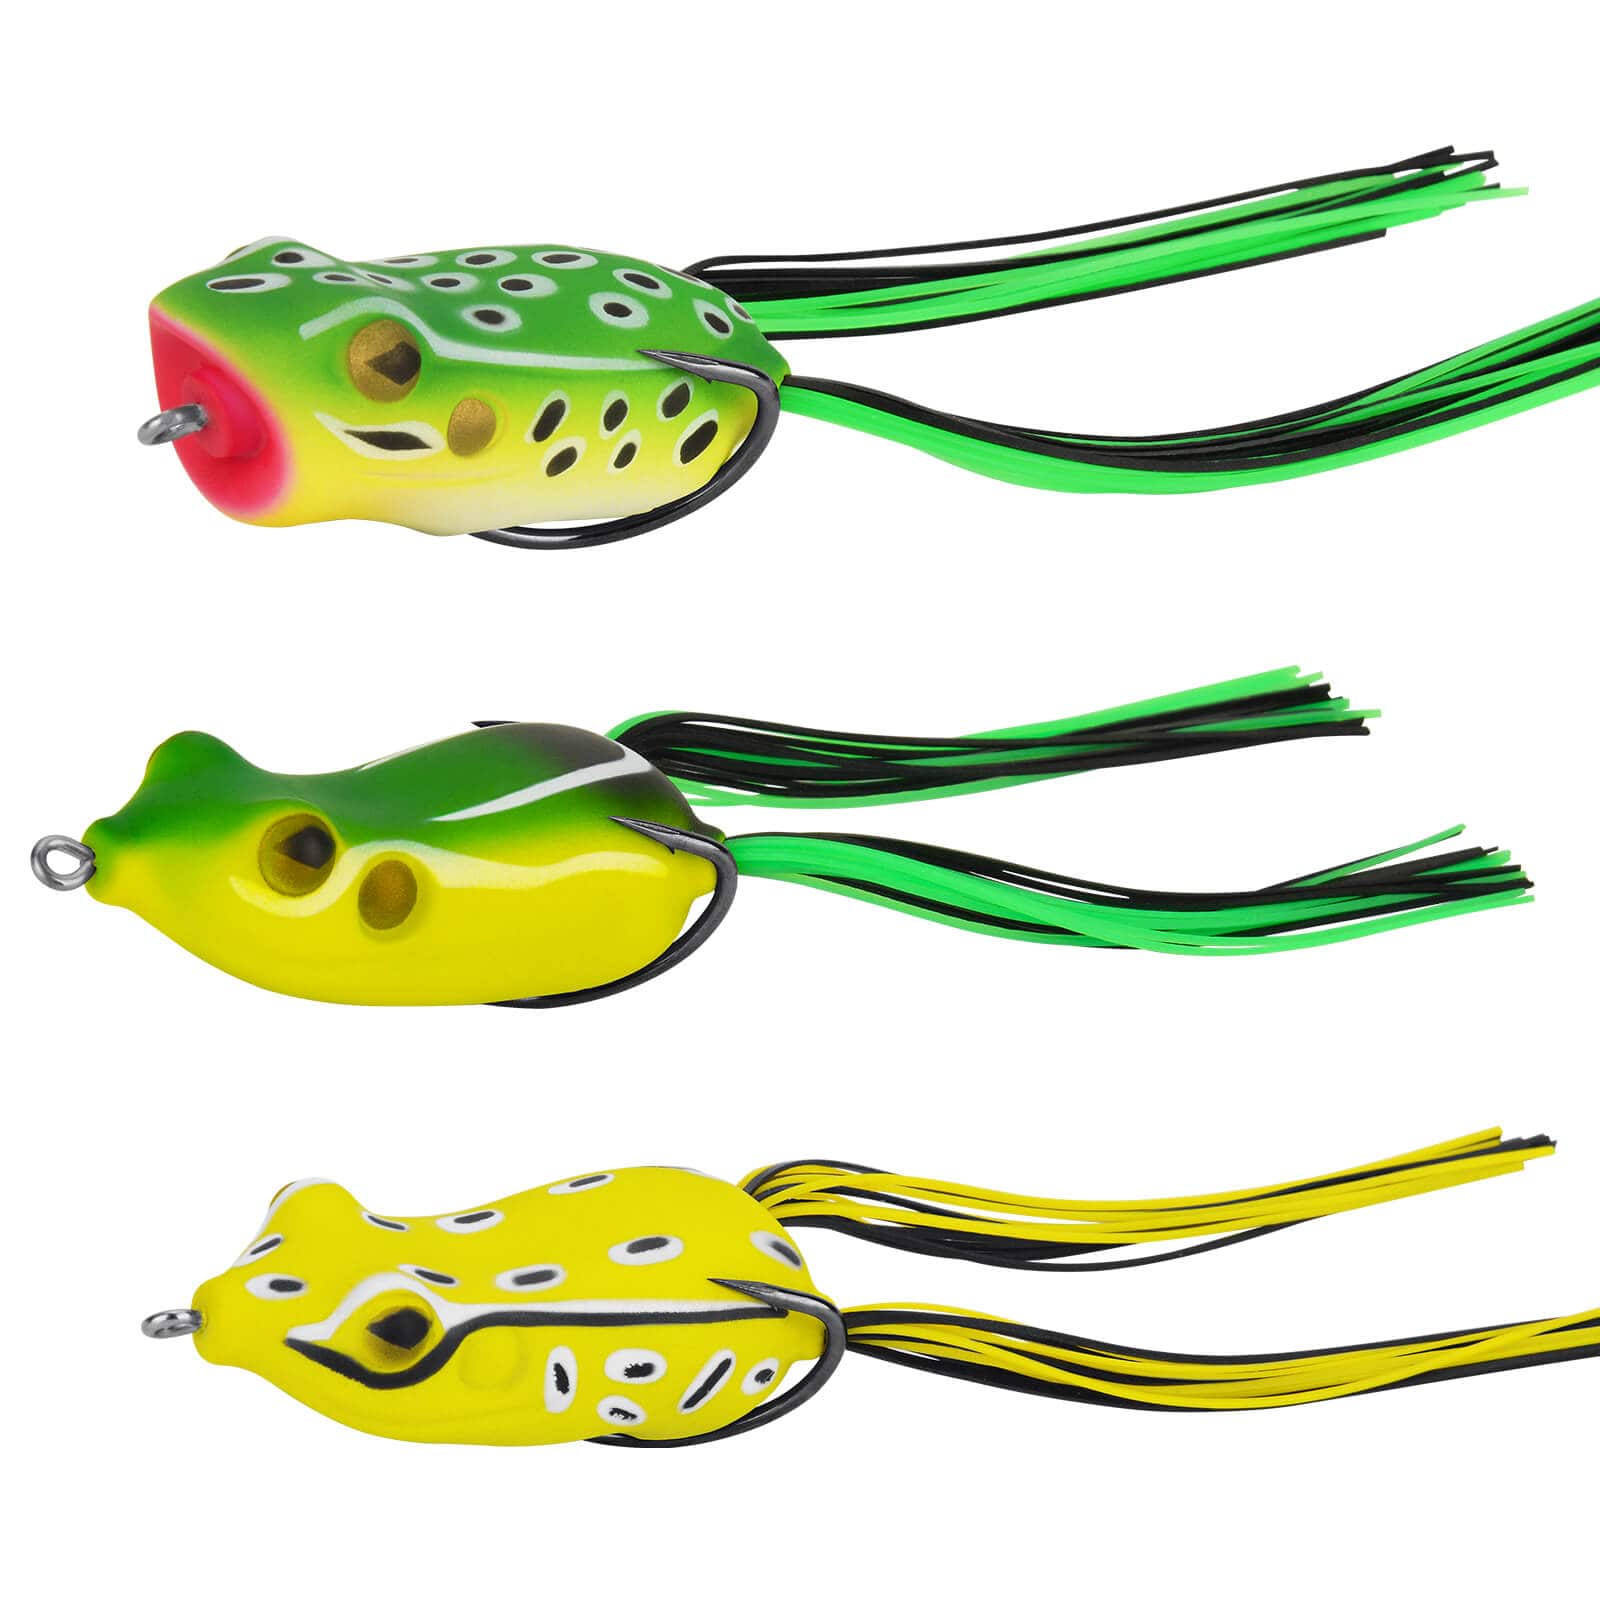 MadBite Bladed Jig Fishing Lures, 5 pc and 3 pc Multi-Color Kits with  Vibrating Action and Sharp Hooks